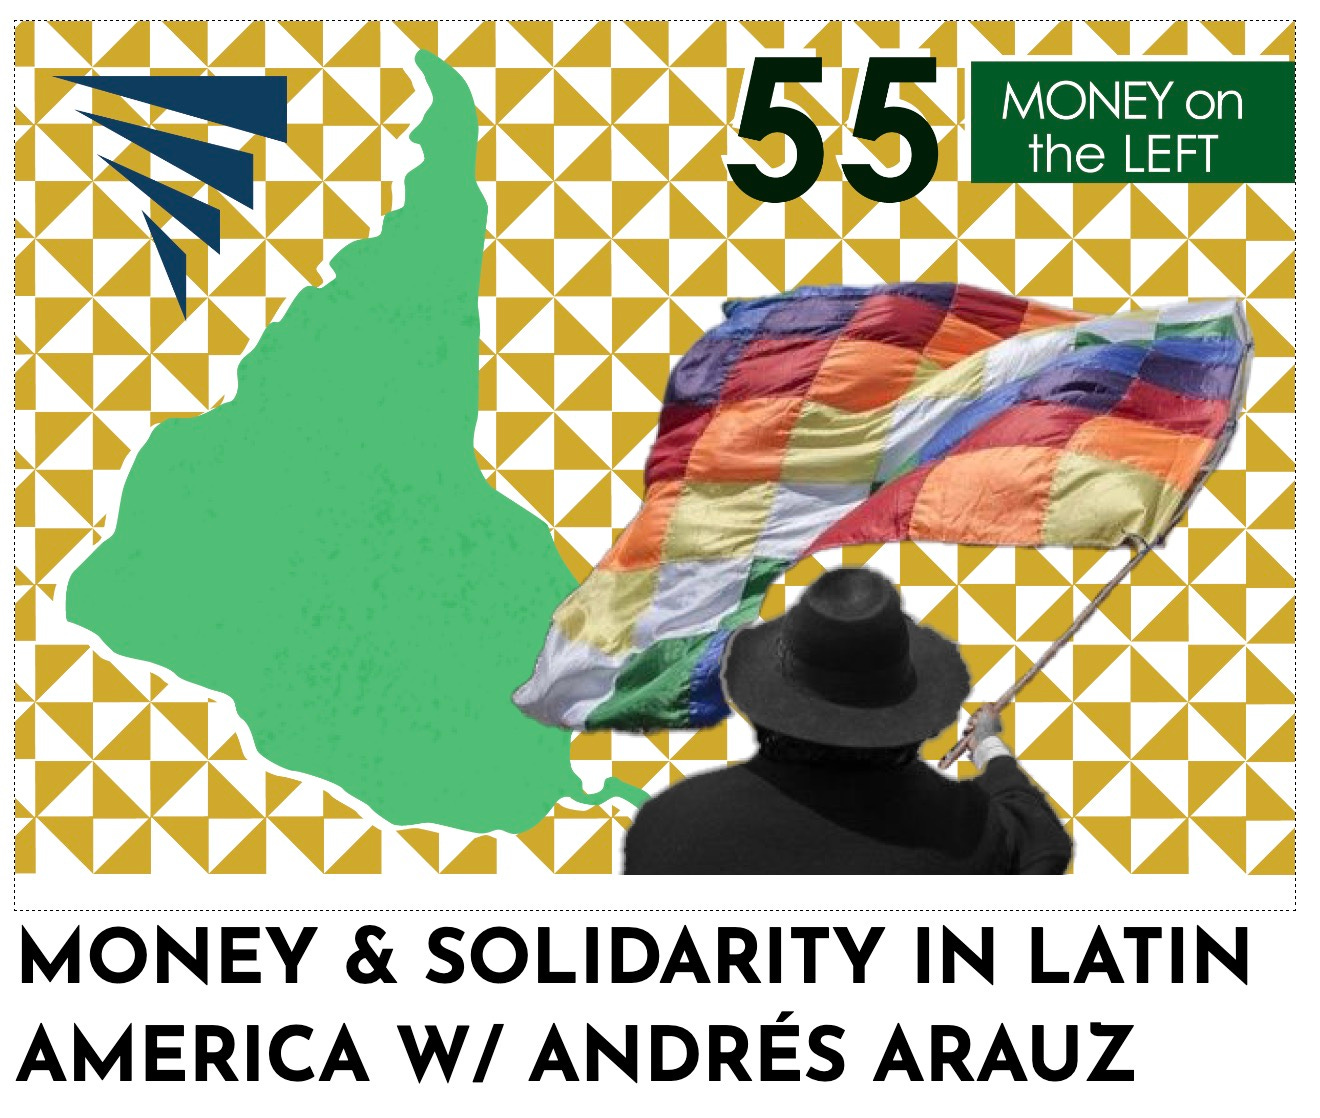 Promo image for this episode of Money on the Left: South America is upside-down